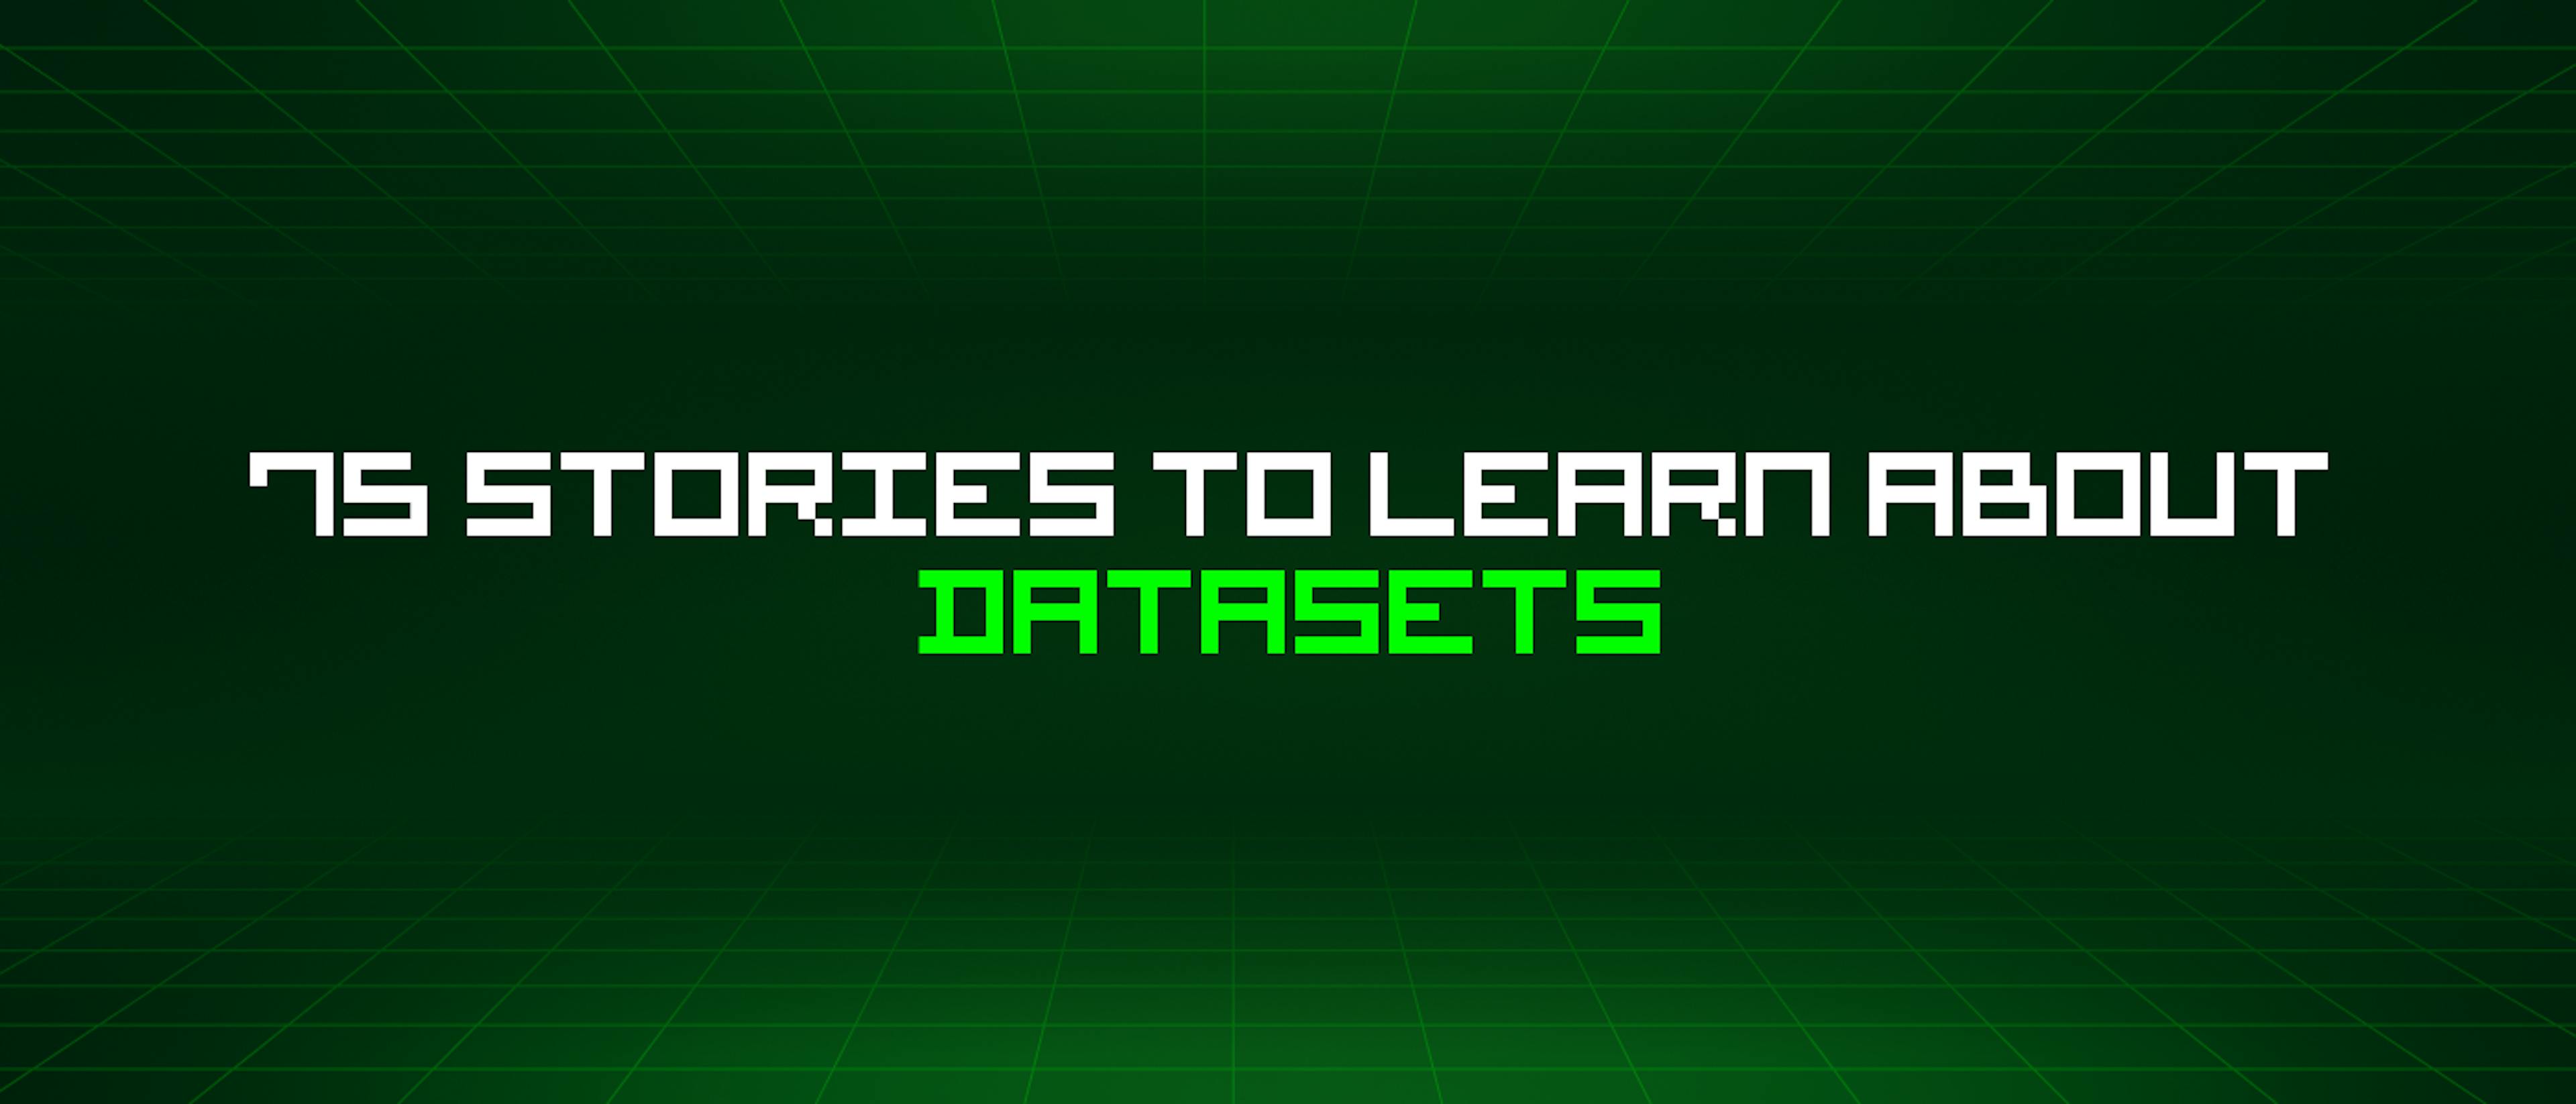 featured image - 75 Stories To Learn About Datasets